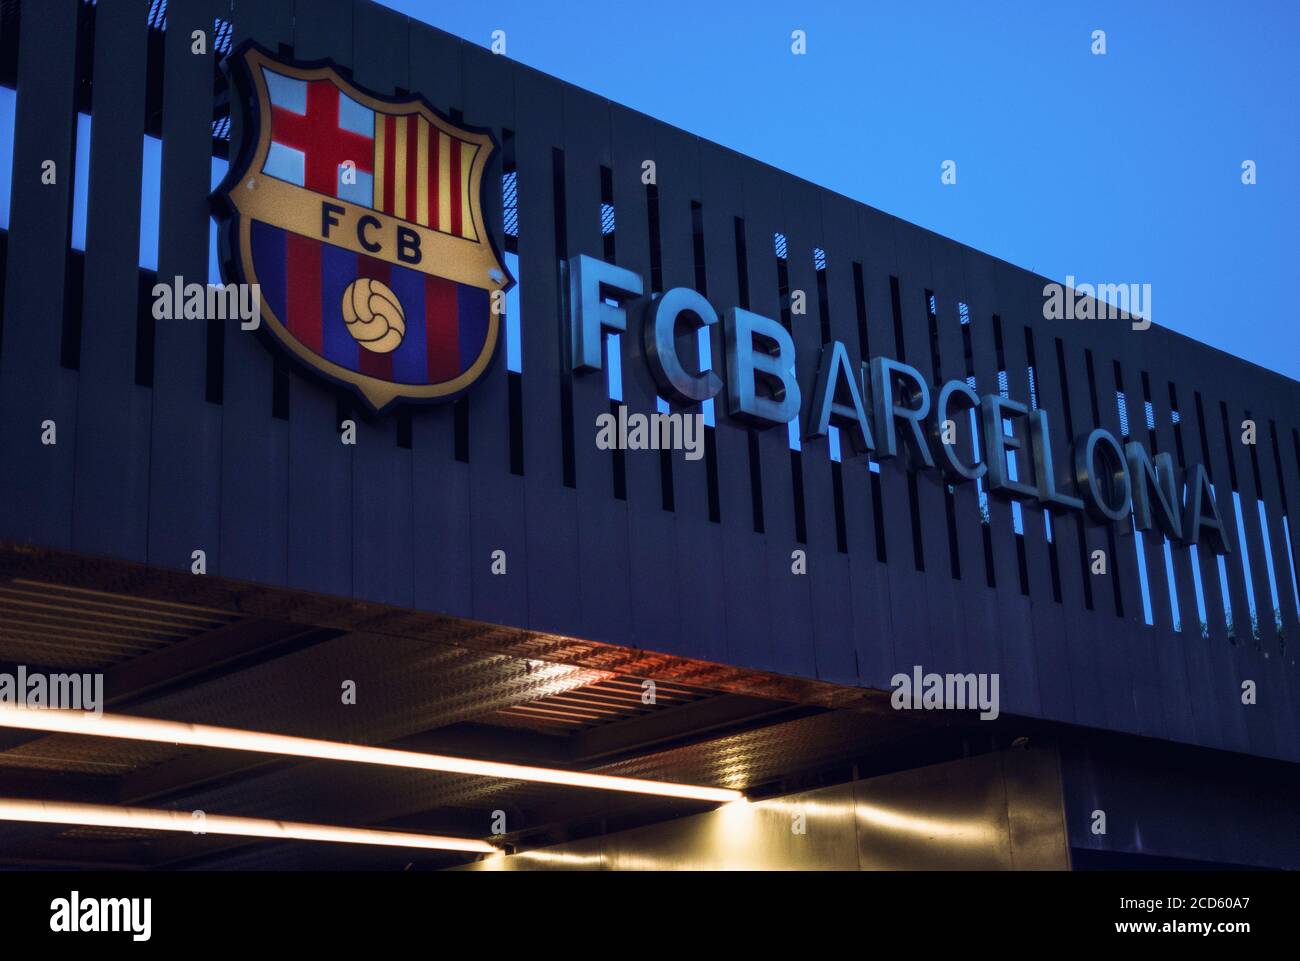 Barcelona, Spain. 26th Aug, 2020. View of the FC Barcelona logo at the Camp Nou stadium after the six-time world footballer Messi announced that he wanted to leave the club. 'Together with the best player in history, we want to rebuild the team for the future,' said sports director Planes. Credit: Matthias Oesterle/dpa/Alamy Live News Stock Photo